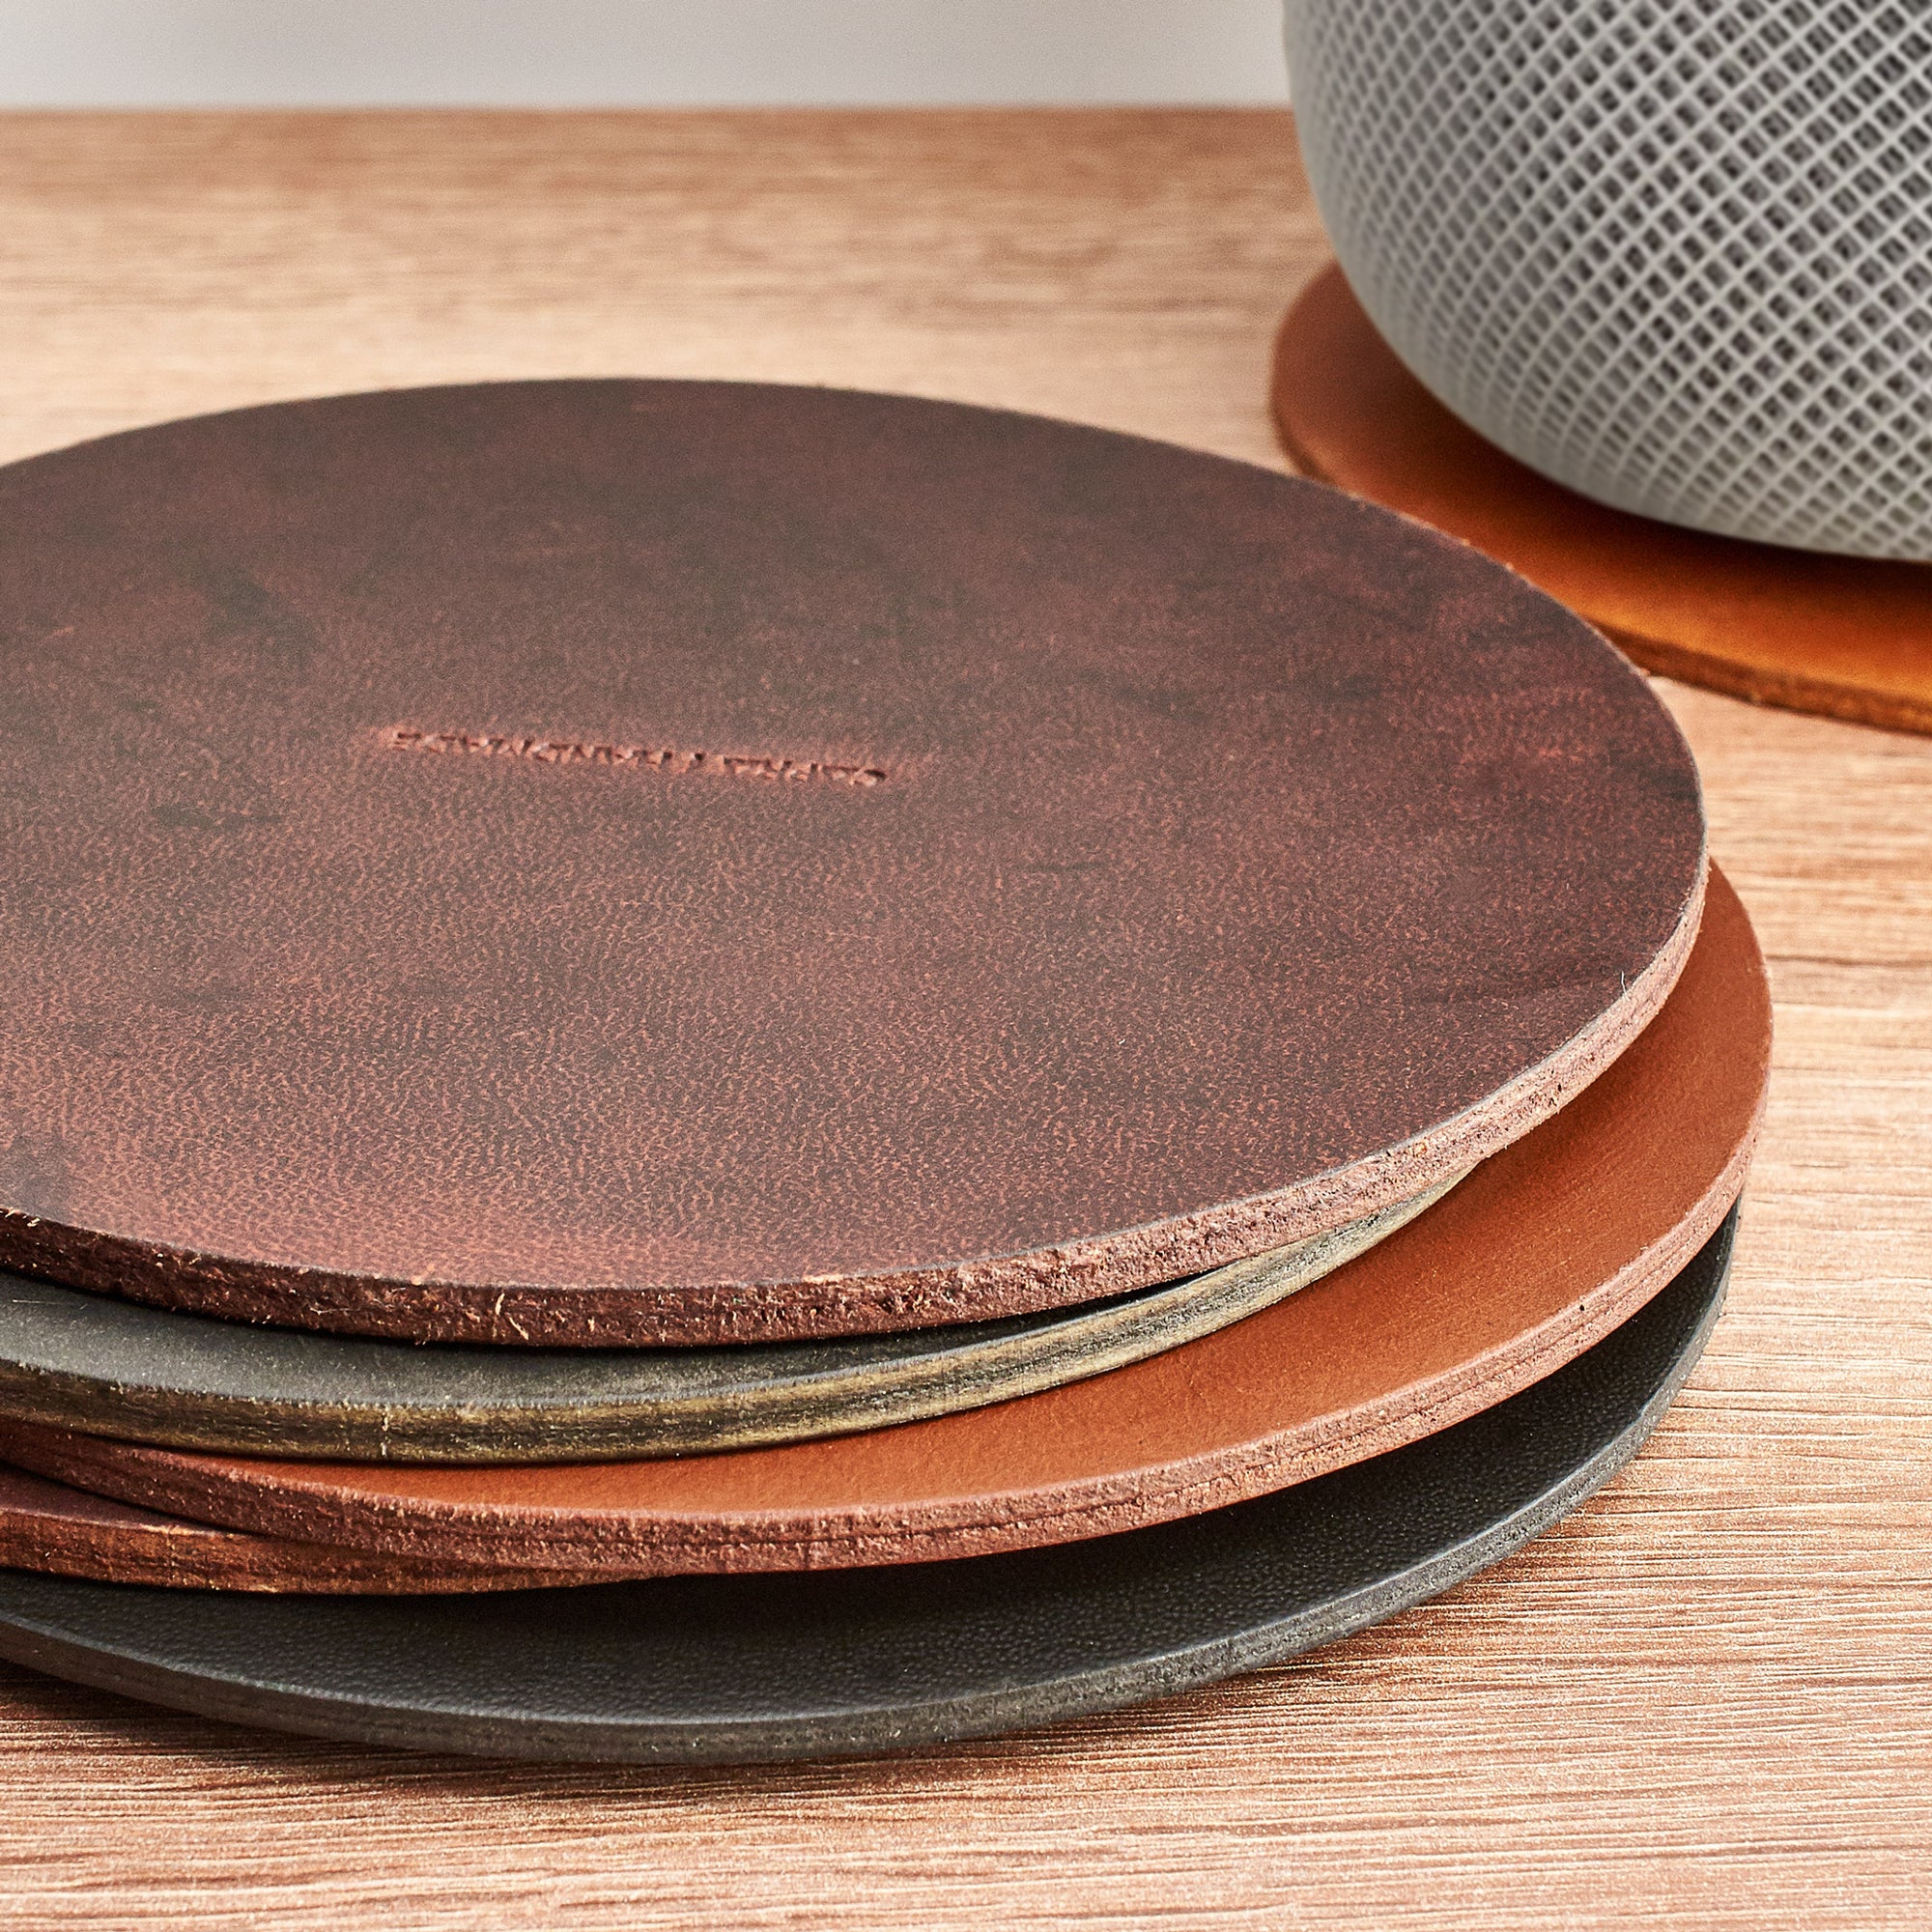 Leather texture. Leather homepod pad, protect wood surfaces from white rings, mens cowhide coasters for apple smart speaker